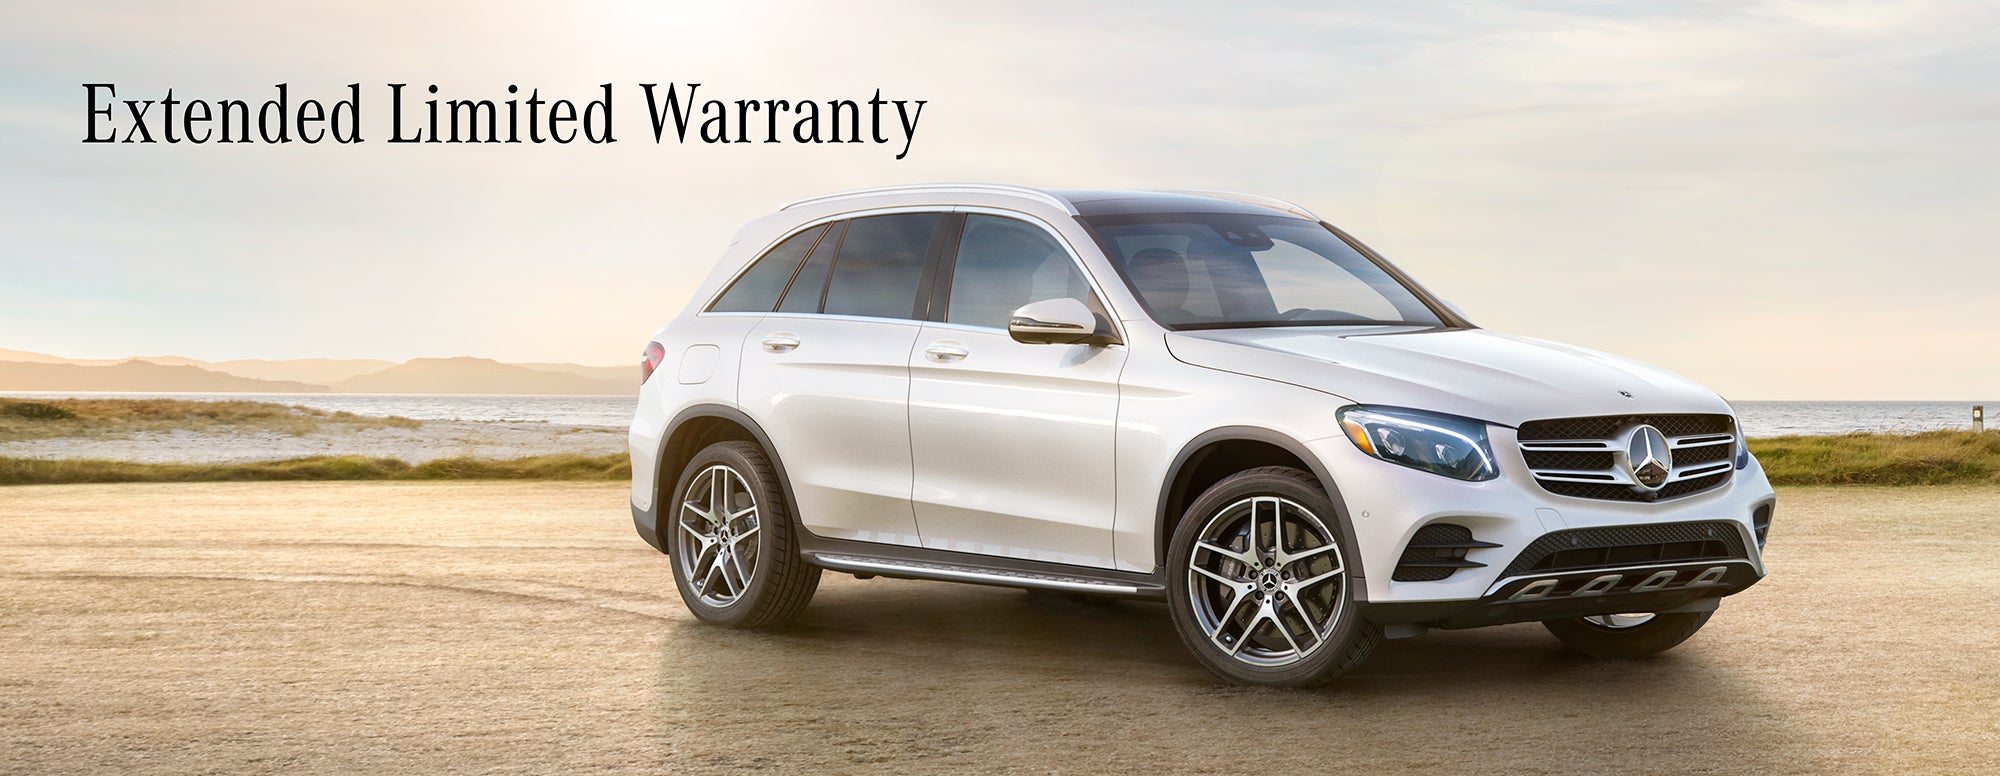 Mercedes-Benz Extended Limited Warranty